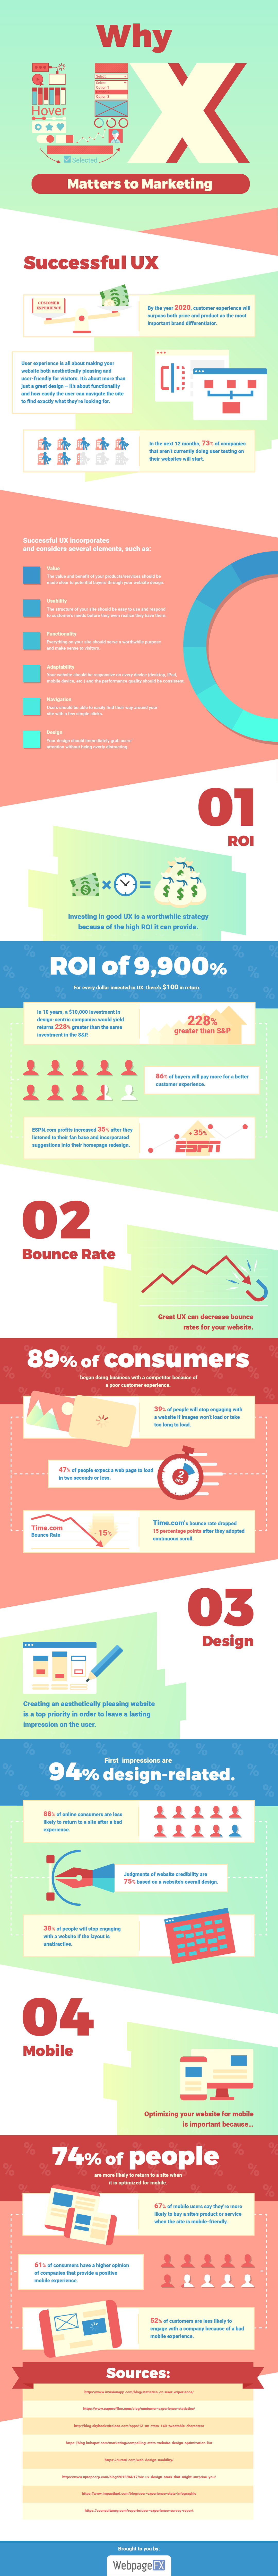 Why UX Matters to Marketing infographic